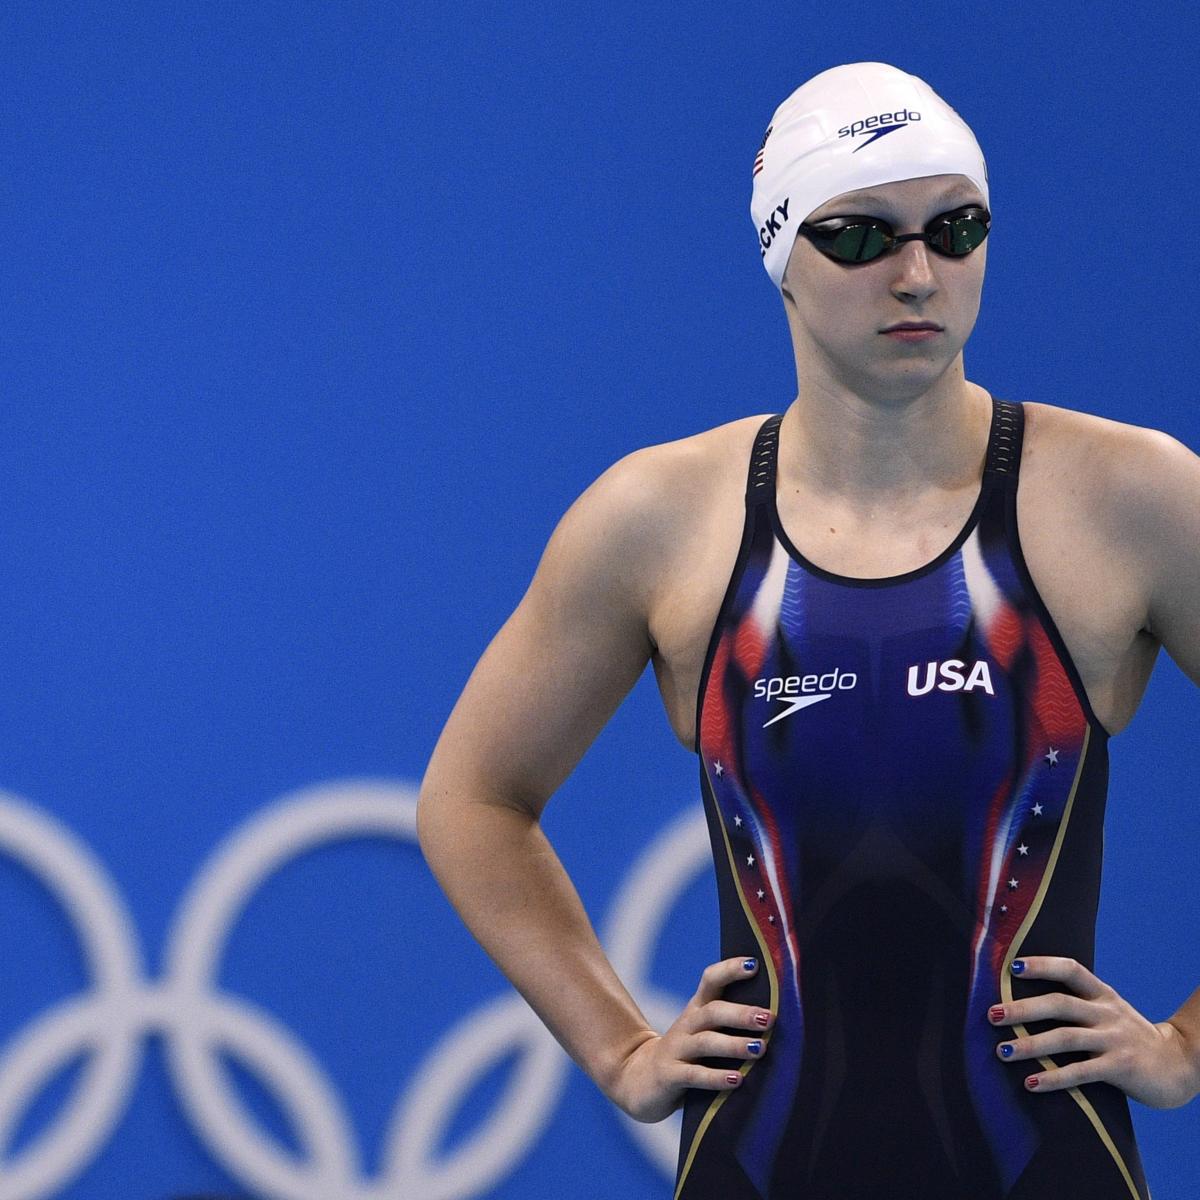 Katie Ledecky Sets Olympic Record in 400M Freestyle at 2016 Rio Games